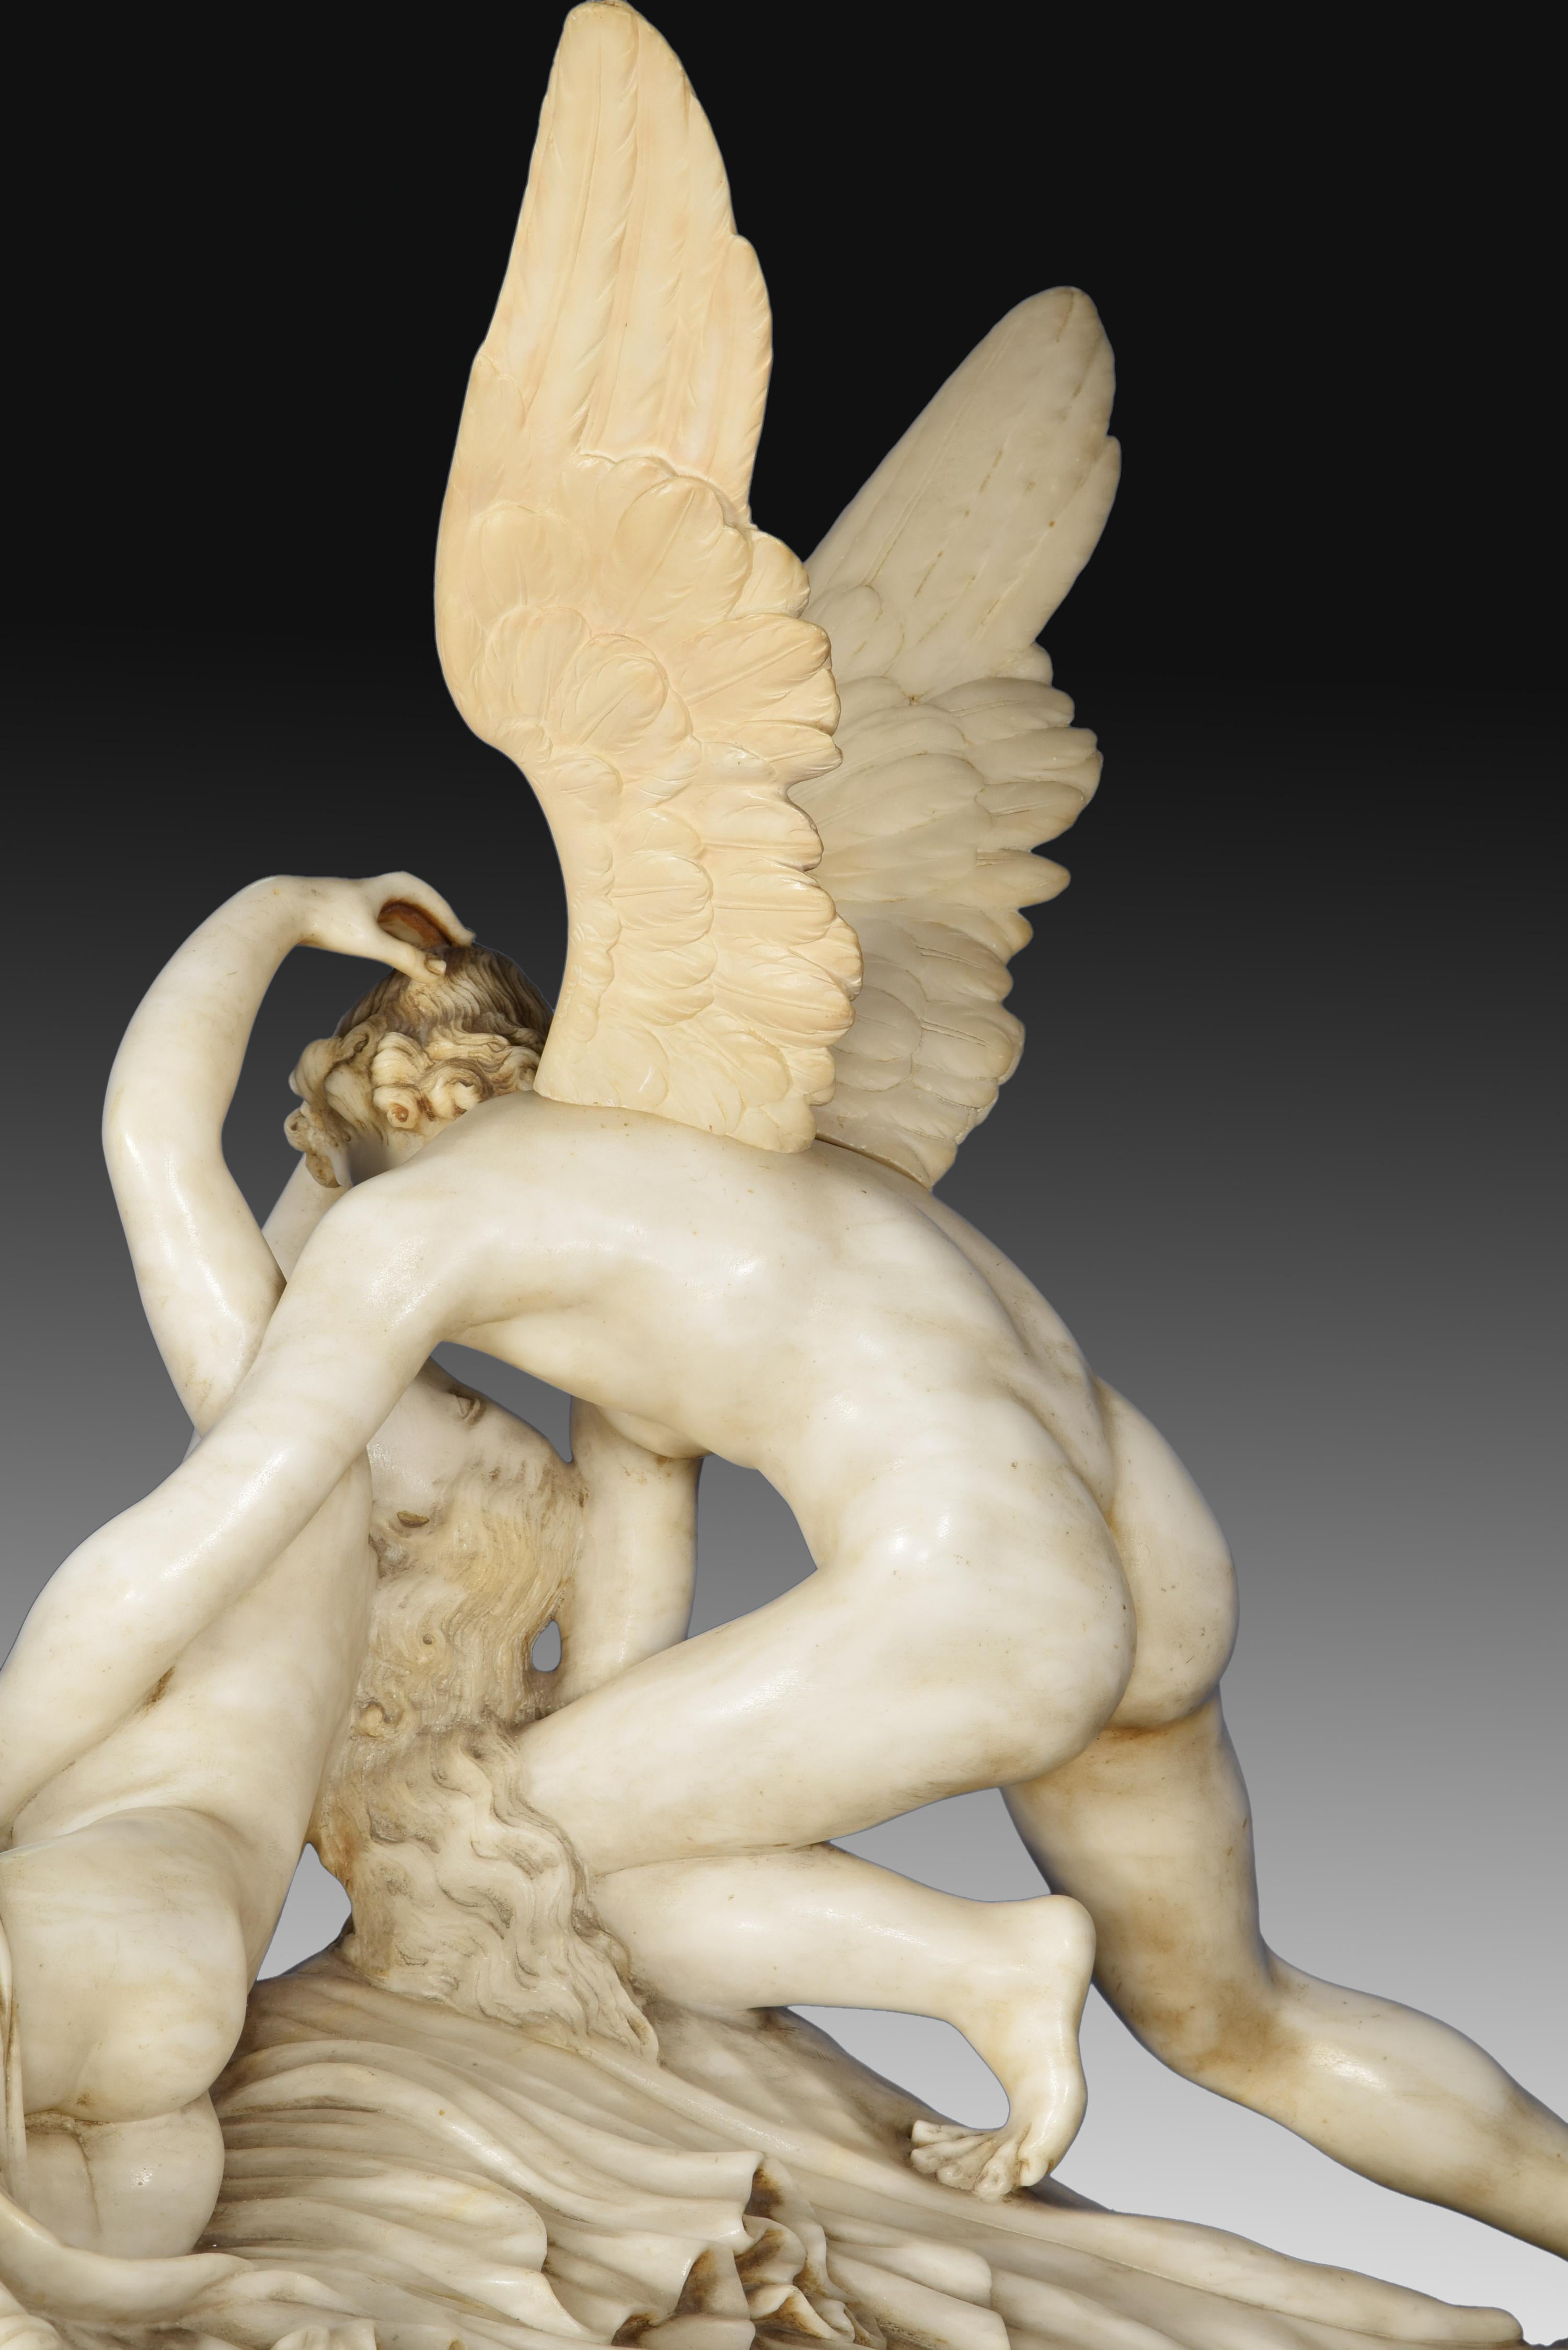 European Psyche Revived by Cupid's Kiss, Alabaster, Marble, after Antonio Canova